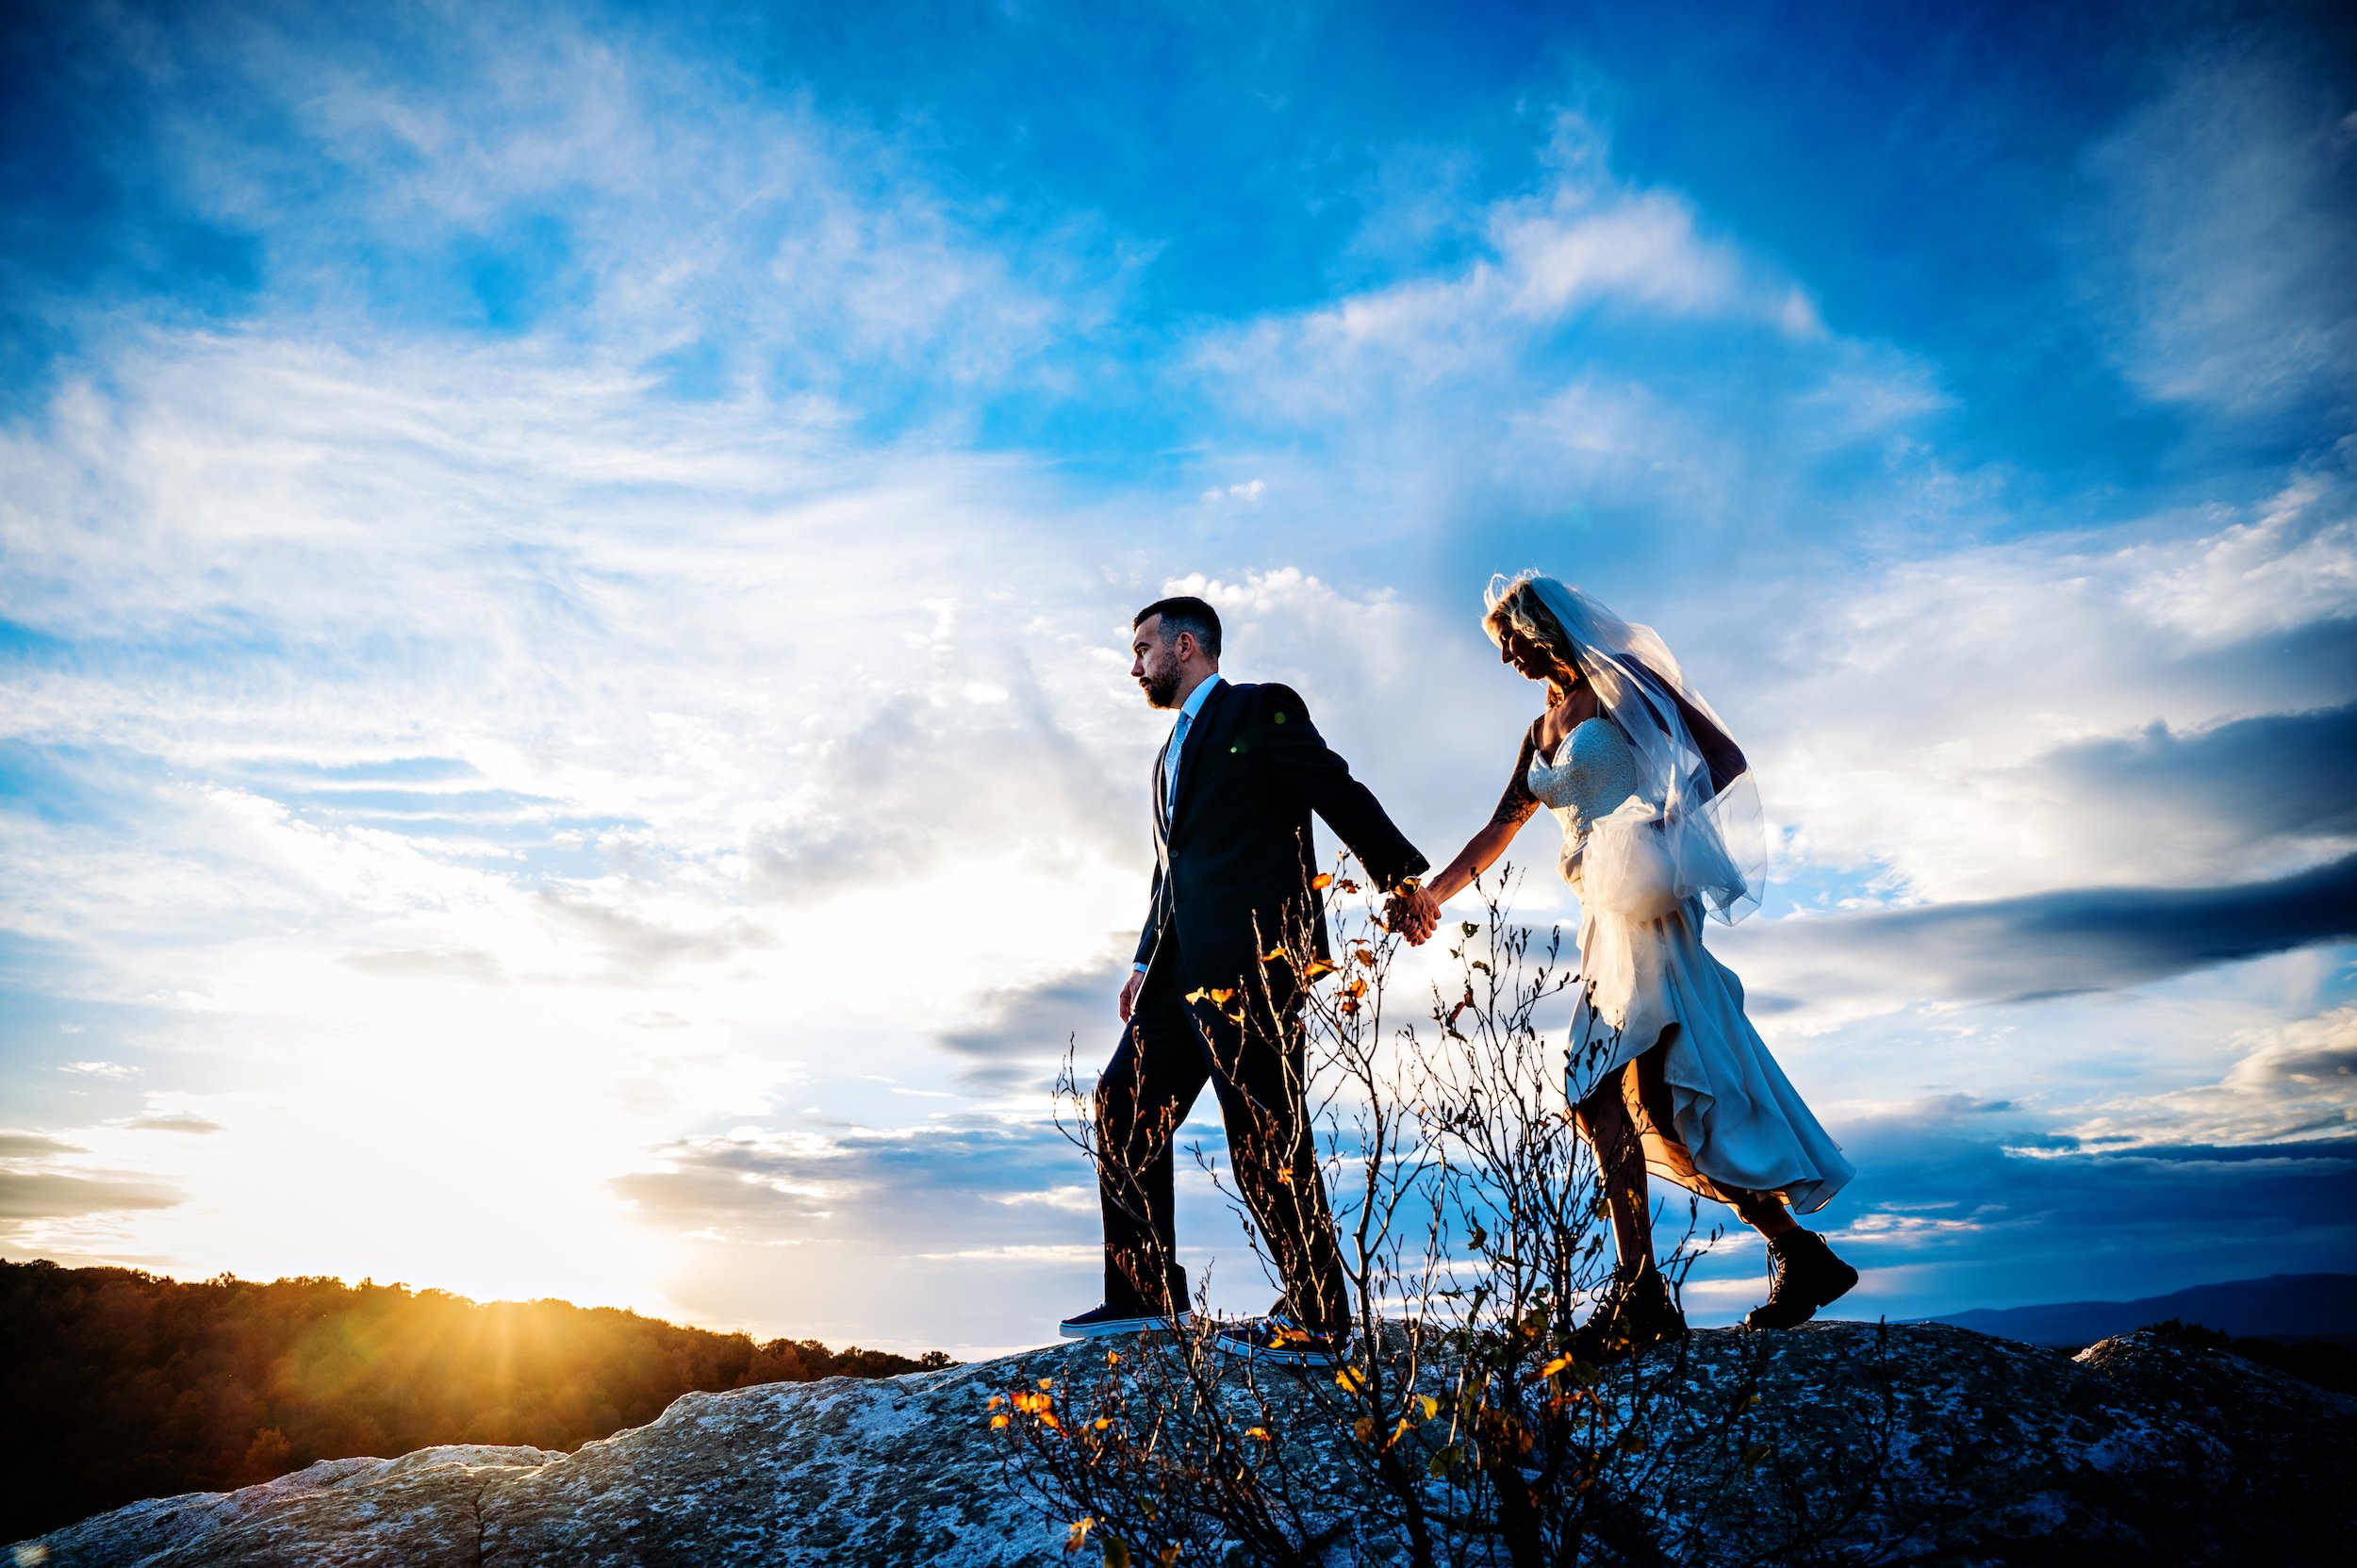 Jeff_Tisman_Photography_Jill_and_Mike_Vow_Renewal_13_Millbrook_Preserve_Mountain_Bride_and_Groom.jpg